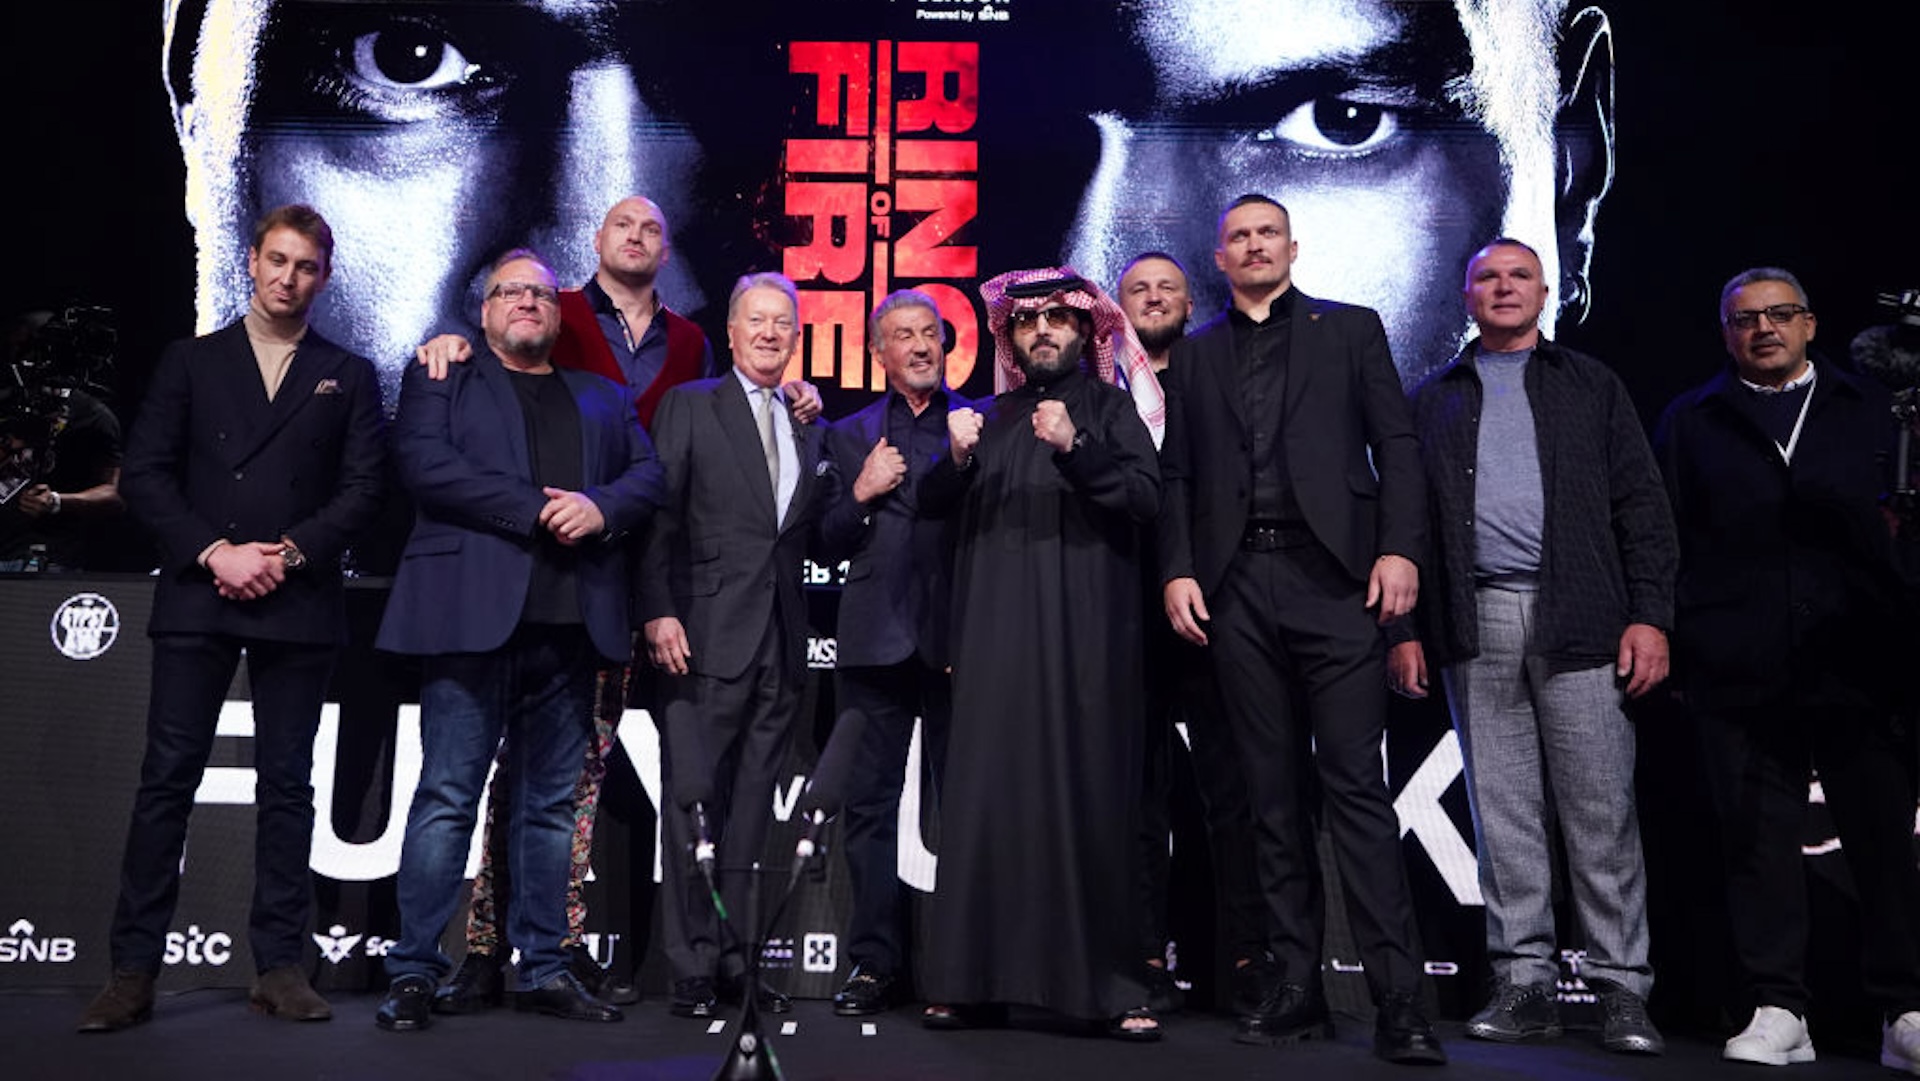 Tyson Fury (third left) and Oleksandr Usyk (third right) pose alongside promoter Frank Warren (fourth left), actor Sylvester Stallone (centre) and The Saudi Chairman of General Authority for Entertainment Turki Alalshikh during a press conference at Outernet London.